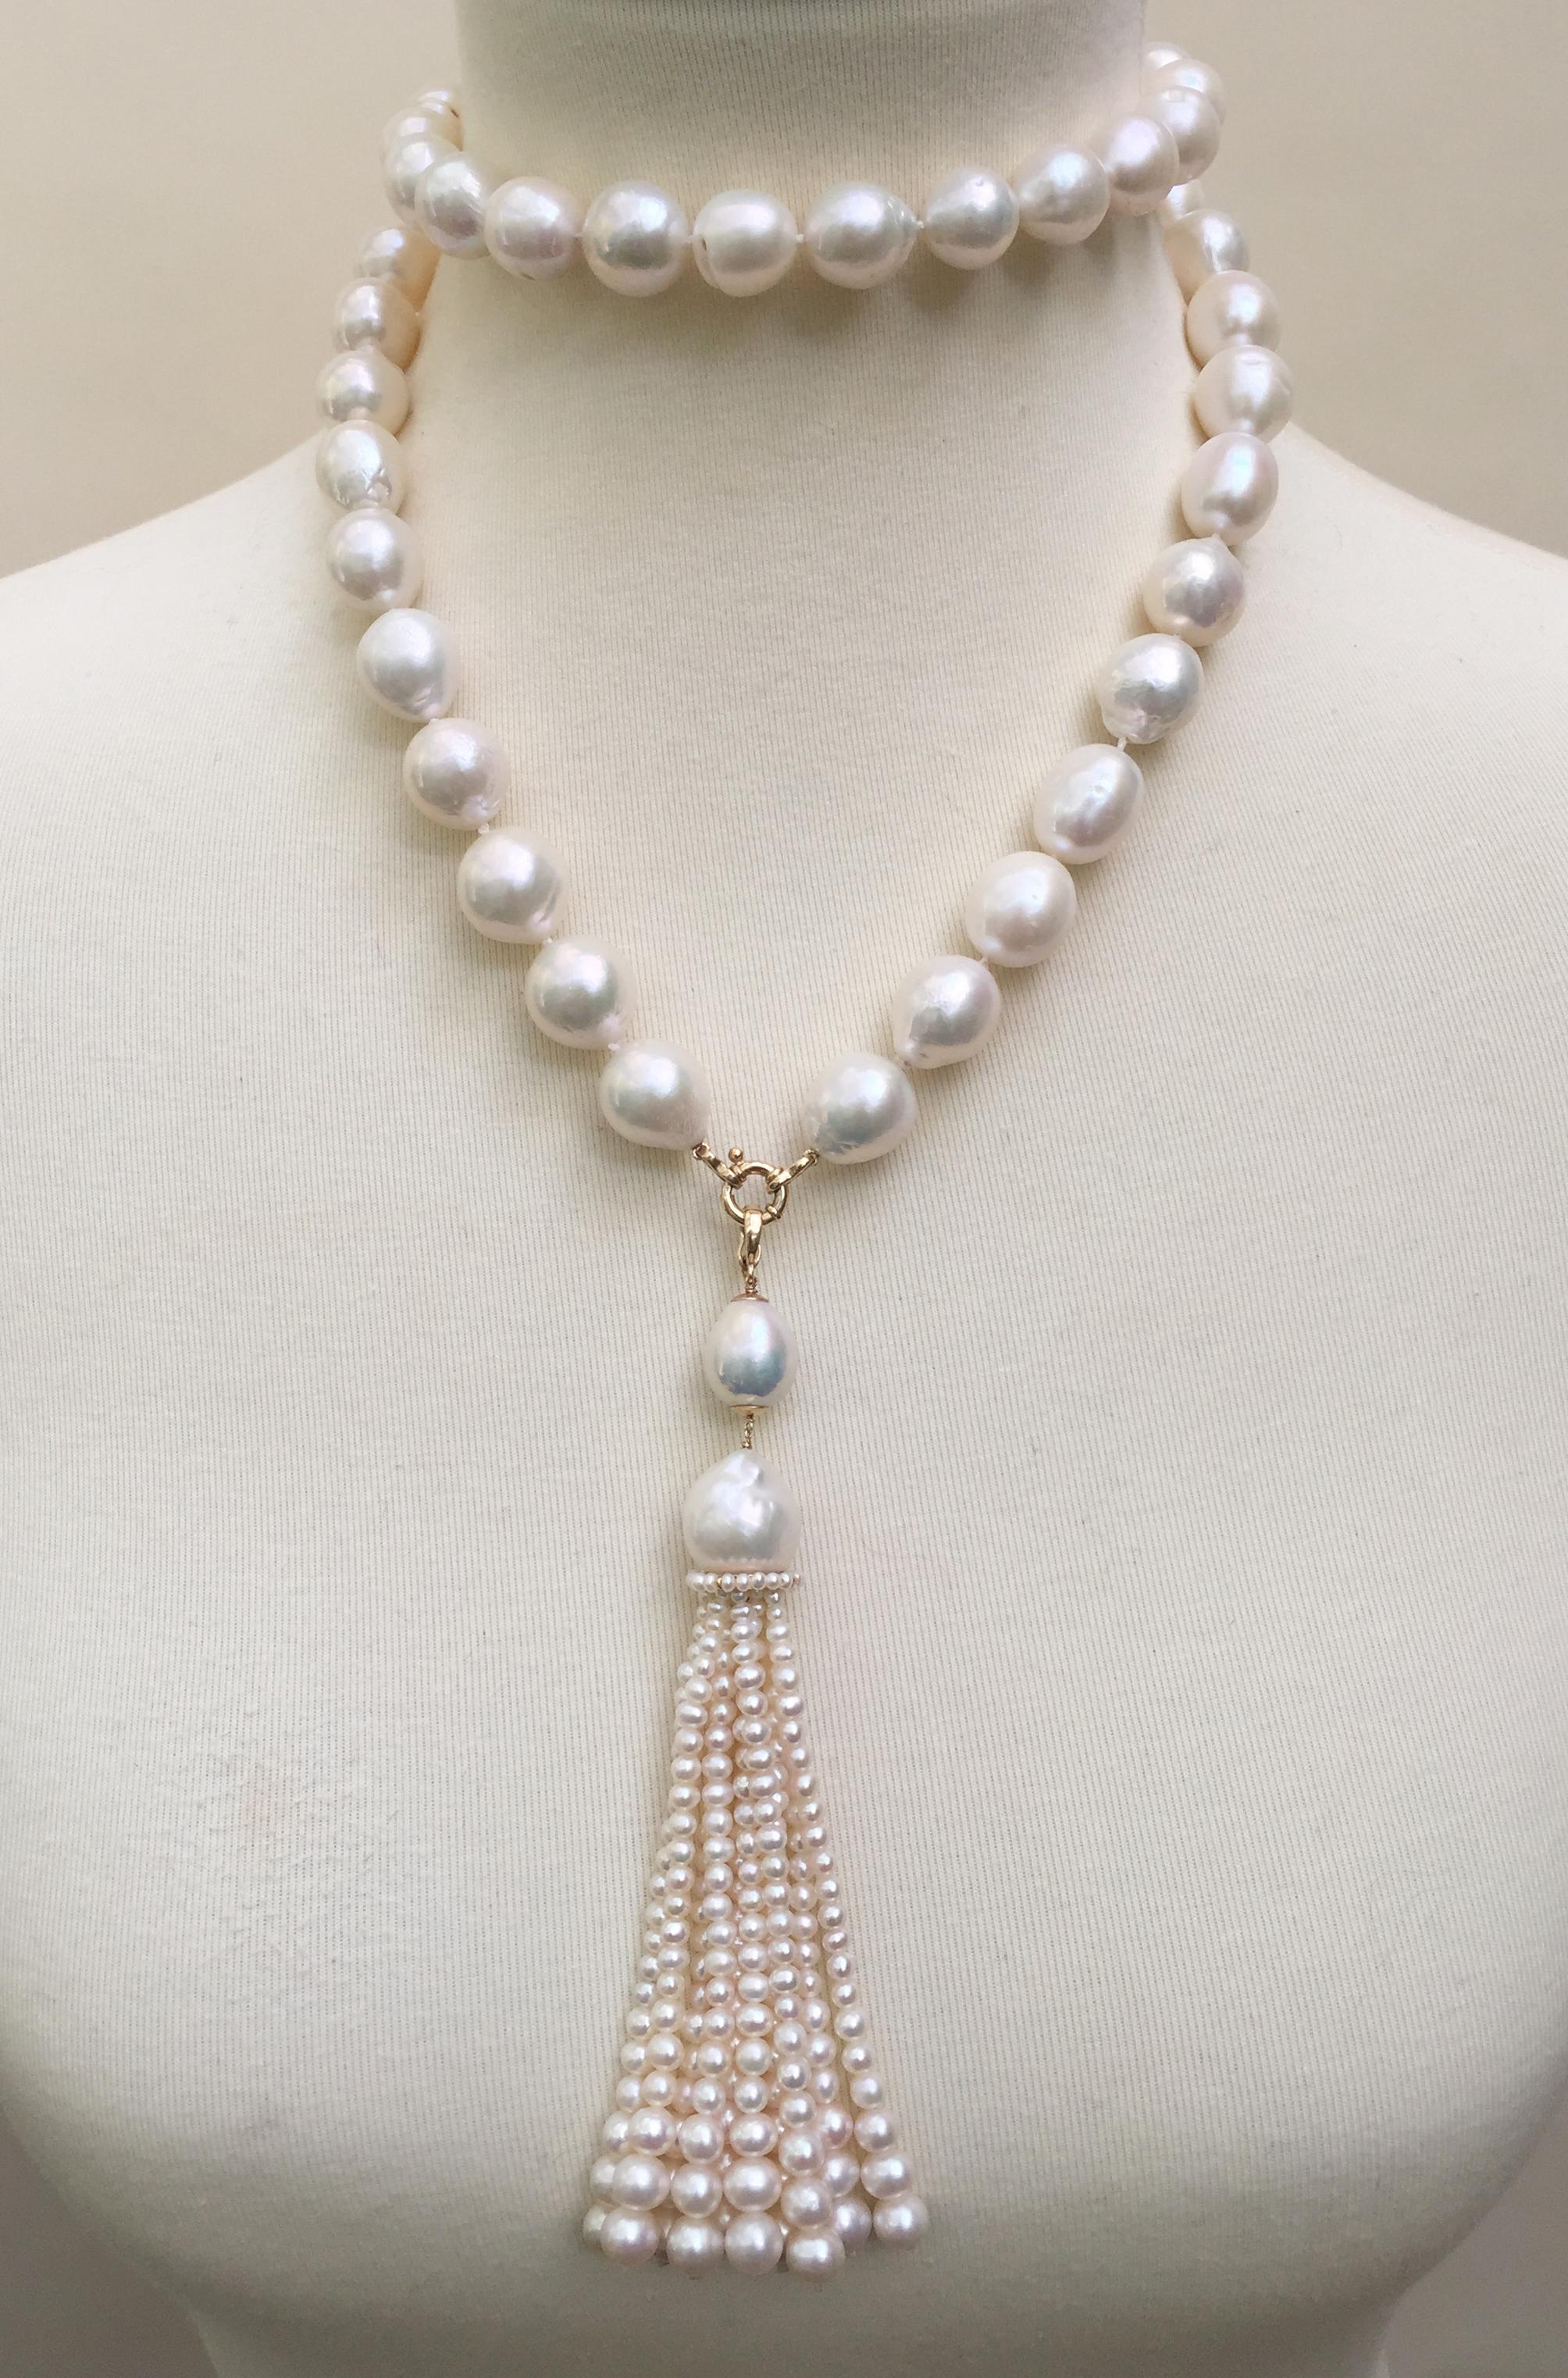 White Pearl Sautoir Necklace and Graduated Tassel with 14 Karat Gold Clasp 1